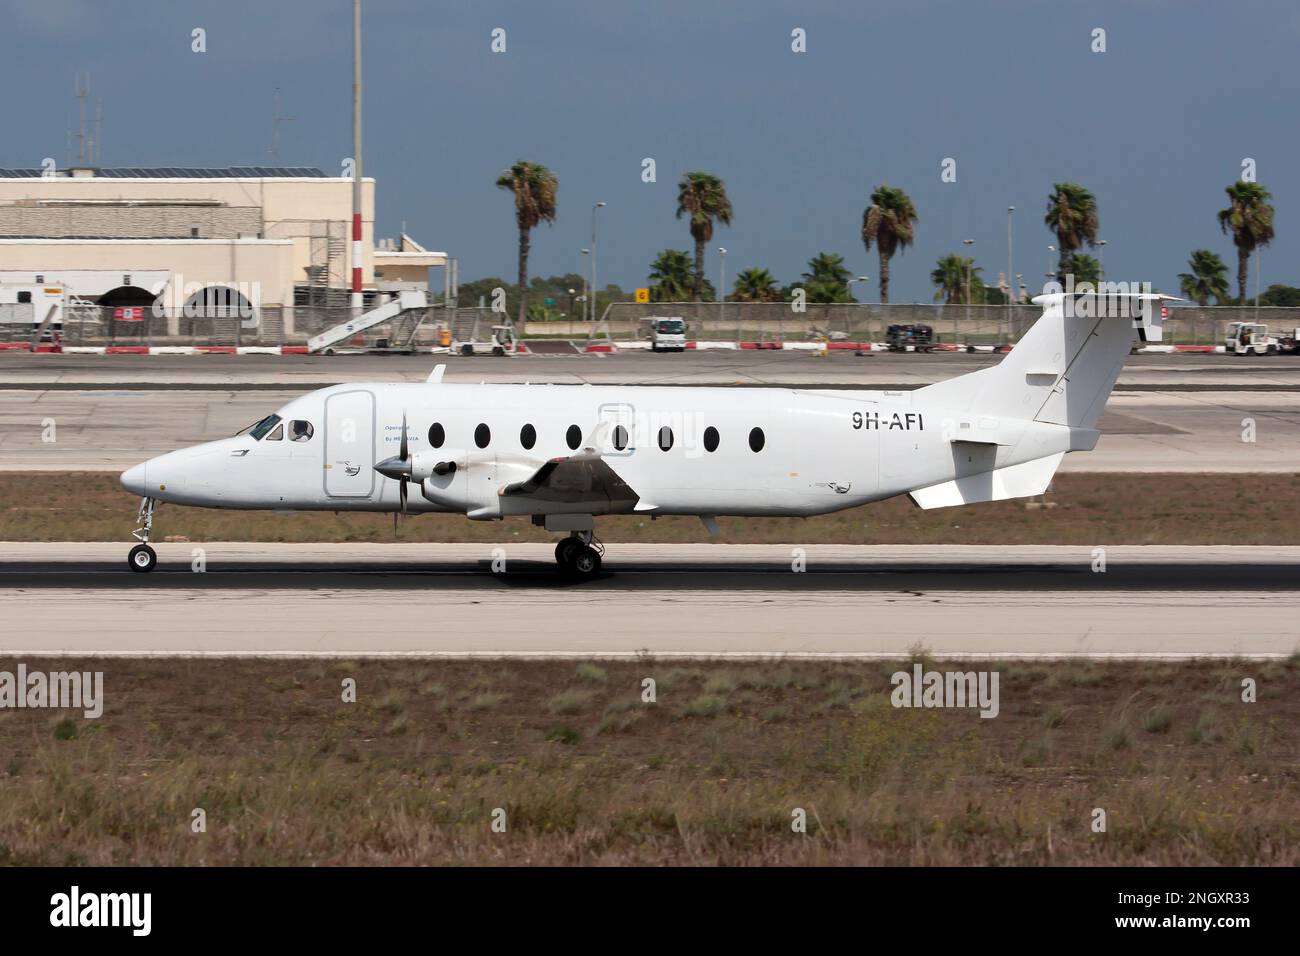 Valletta, Malta. 26th Sep, 2014. A MedAvia Beechcraft 1900D on the runway at Malta international airport. Mediterranean Aviation Company Limited, (Medavia), is an Aviation Service Provider with its head office and base of operations in Malta. (Photo by Fabrizio Gandolfo/SOPA Images/Sipa USA) Credit: Sipa USA/Alamy Live News Stock Photo